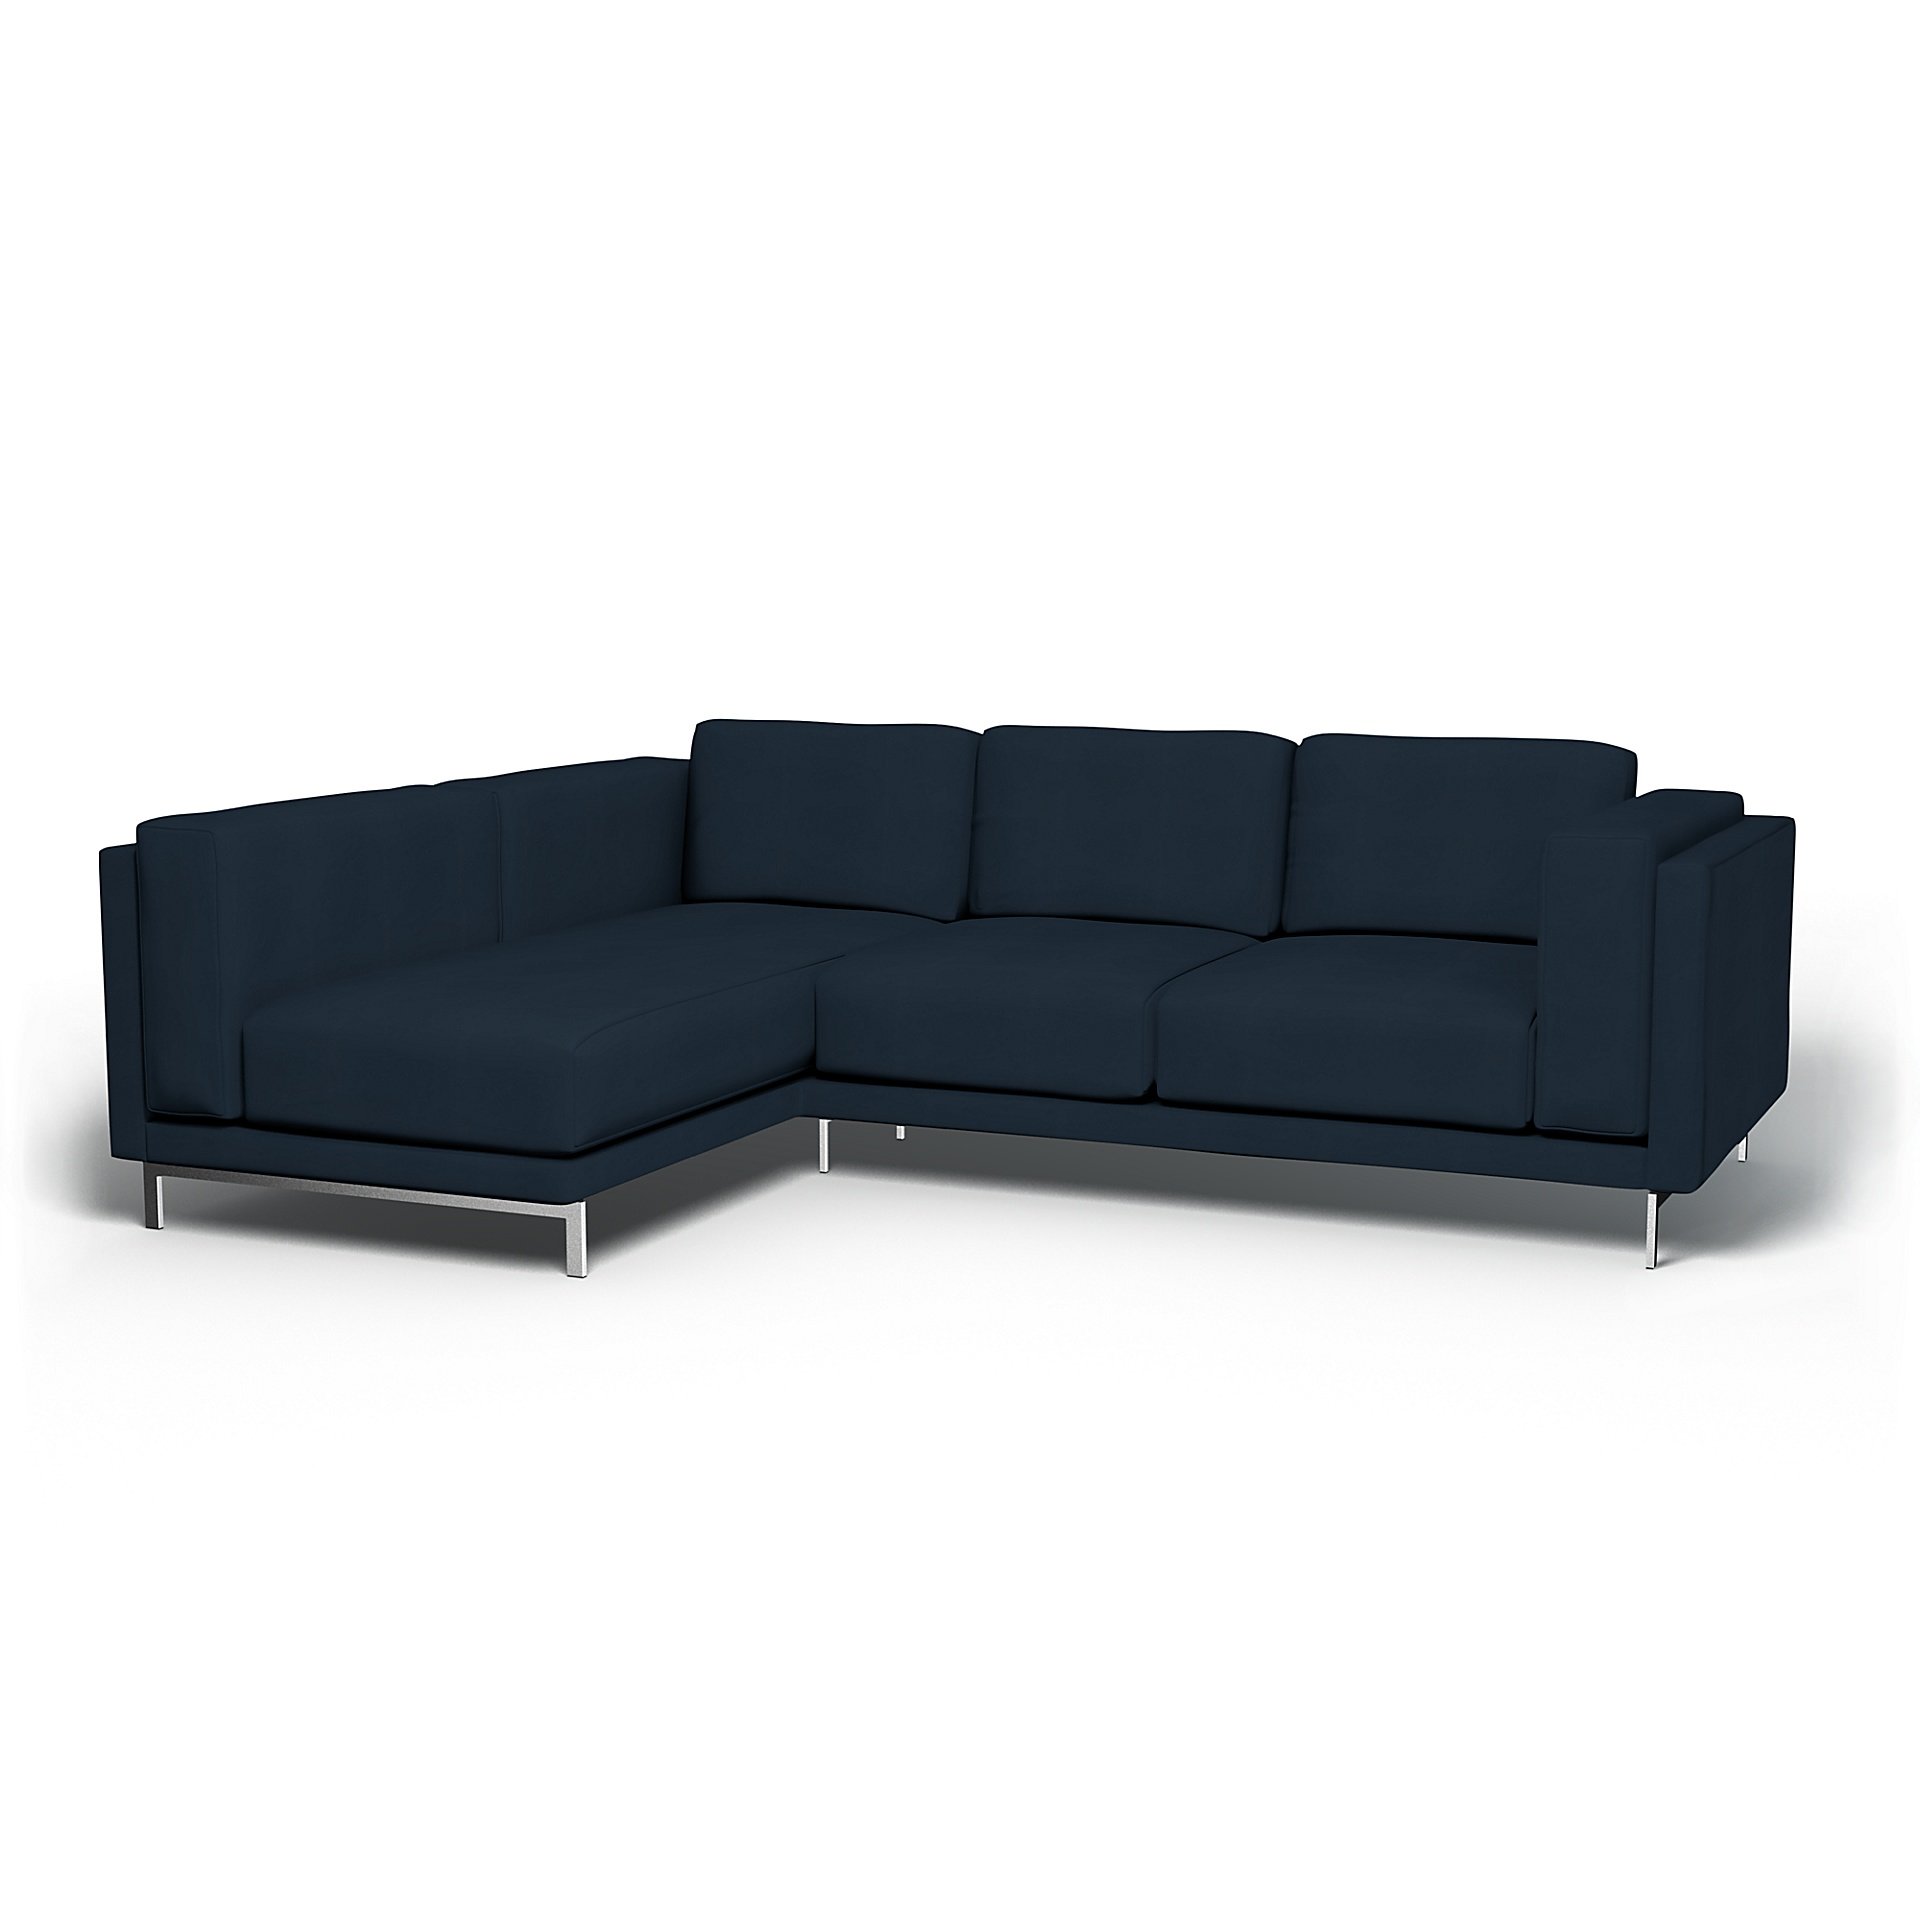 IKEA - Nockeby 3 Seater Sofa with Left Chaise Cover, Navy Blue, Cotton - Bemz